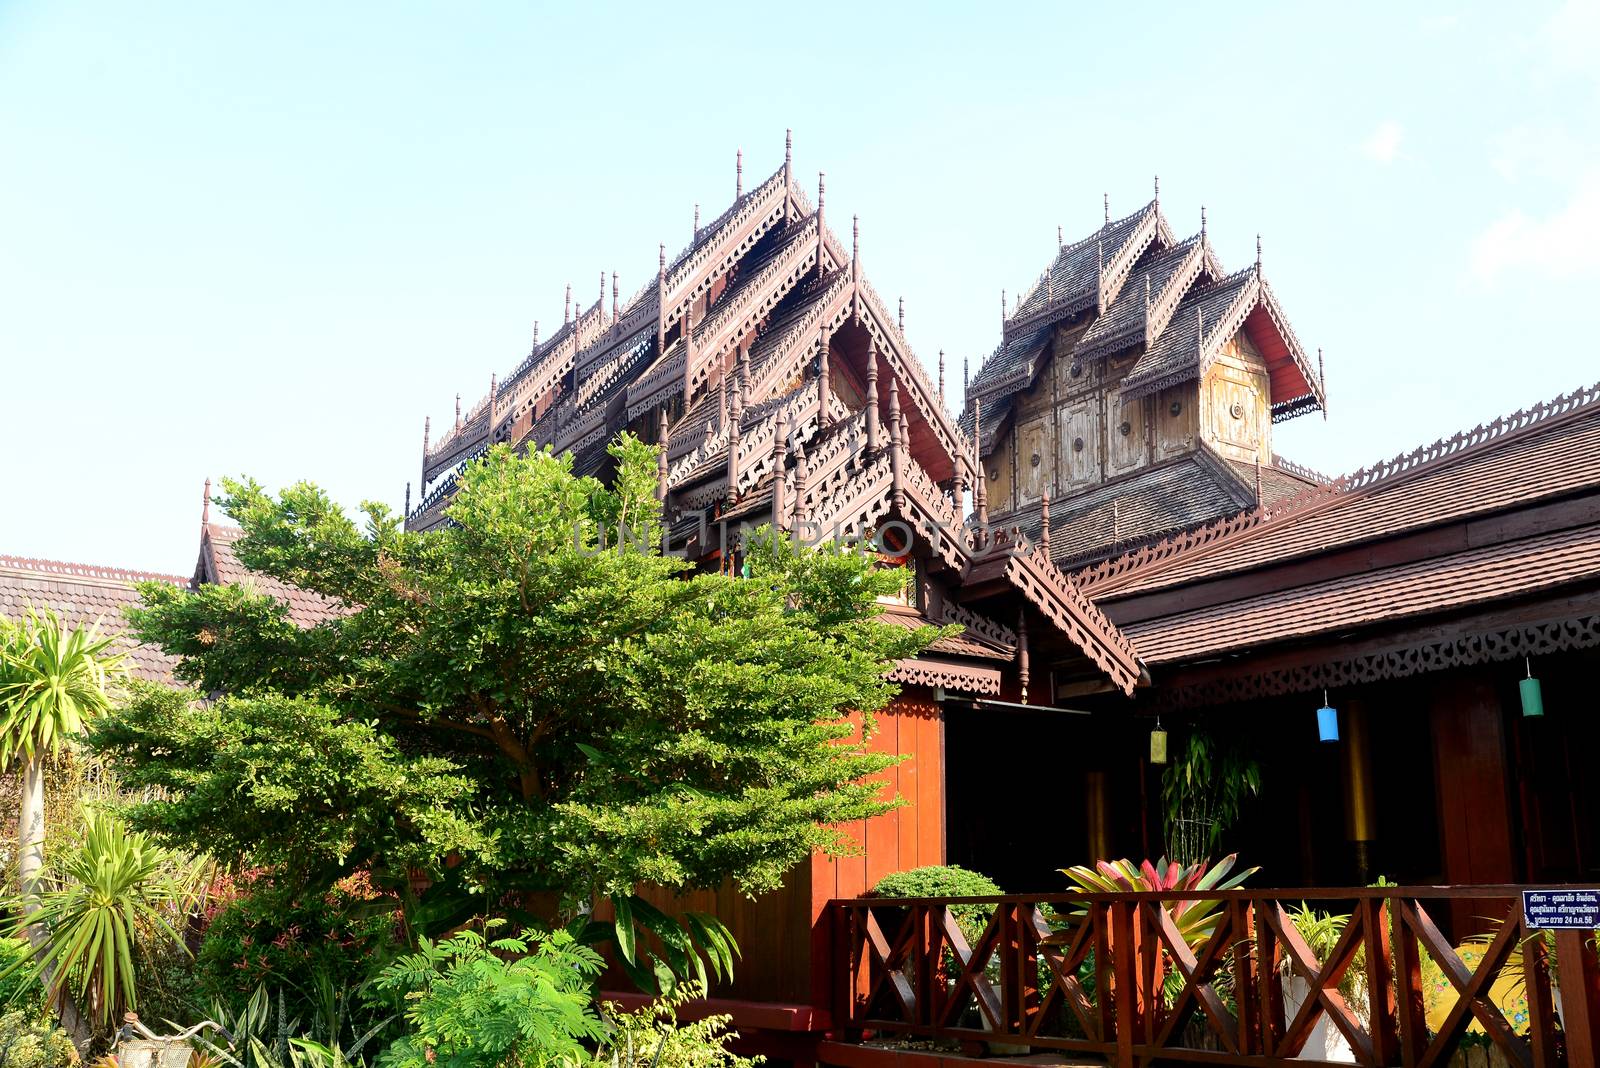 Phayao, Thailand  – 21 December, 2019 : Wat Nantaram is a Tai Yai (Shan-style) community temple in central Chiang Kham and exhibits the classic Tai Yai roof architecture, somewhat extraordinary